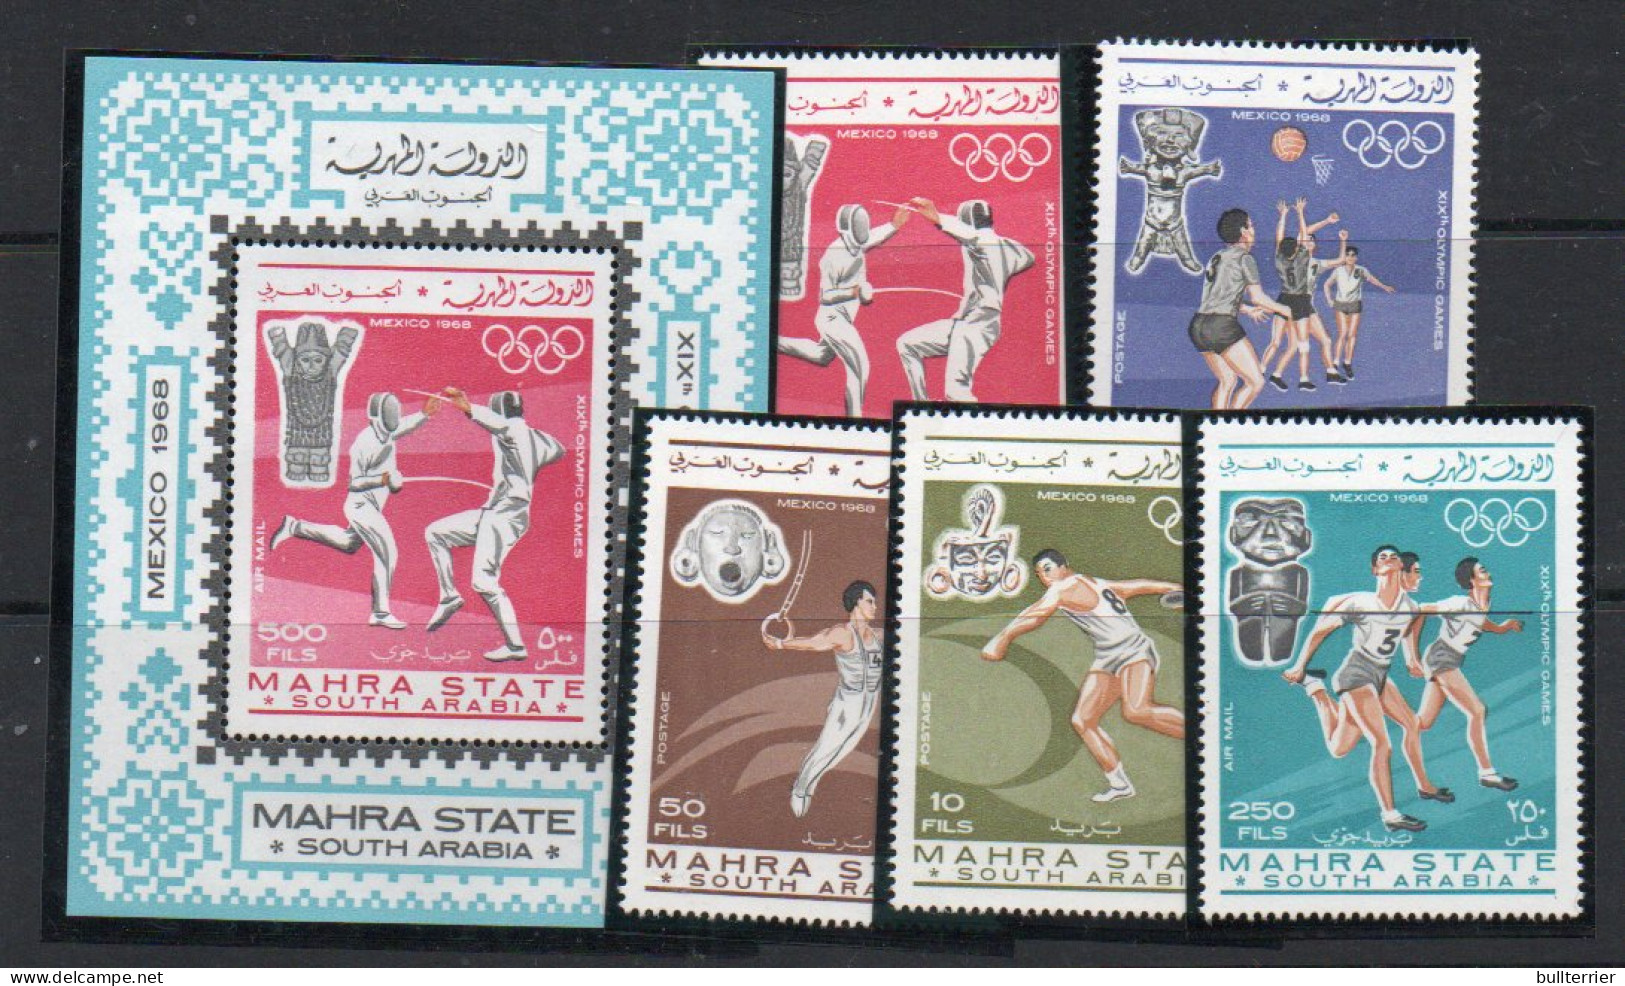 OLYMPICS -  MAHRA STATE - 1967 - MEXICO OLYMPICS SET OF 5 + S/SHEET PERF (mic 25/29 +bl2a)  MINT NEVER HINGED,  - Ete 1968: Mexico